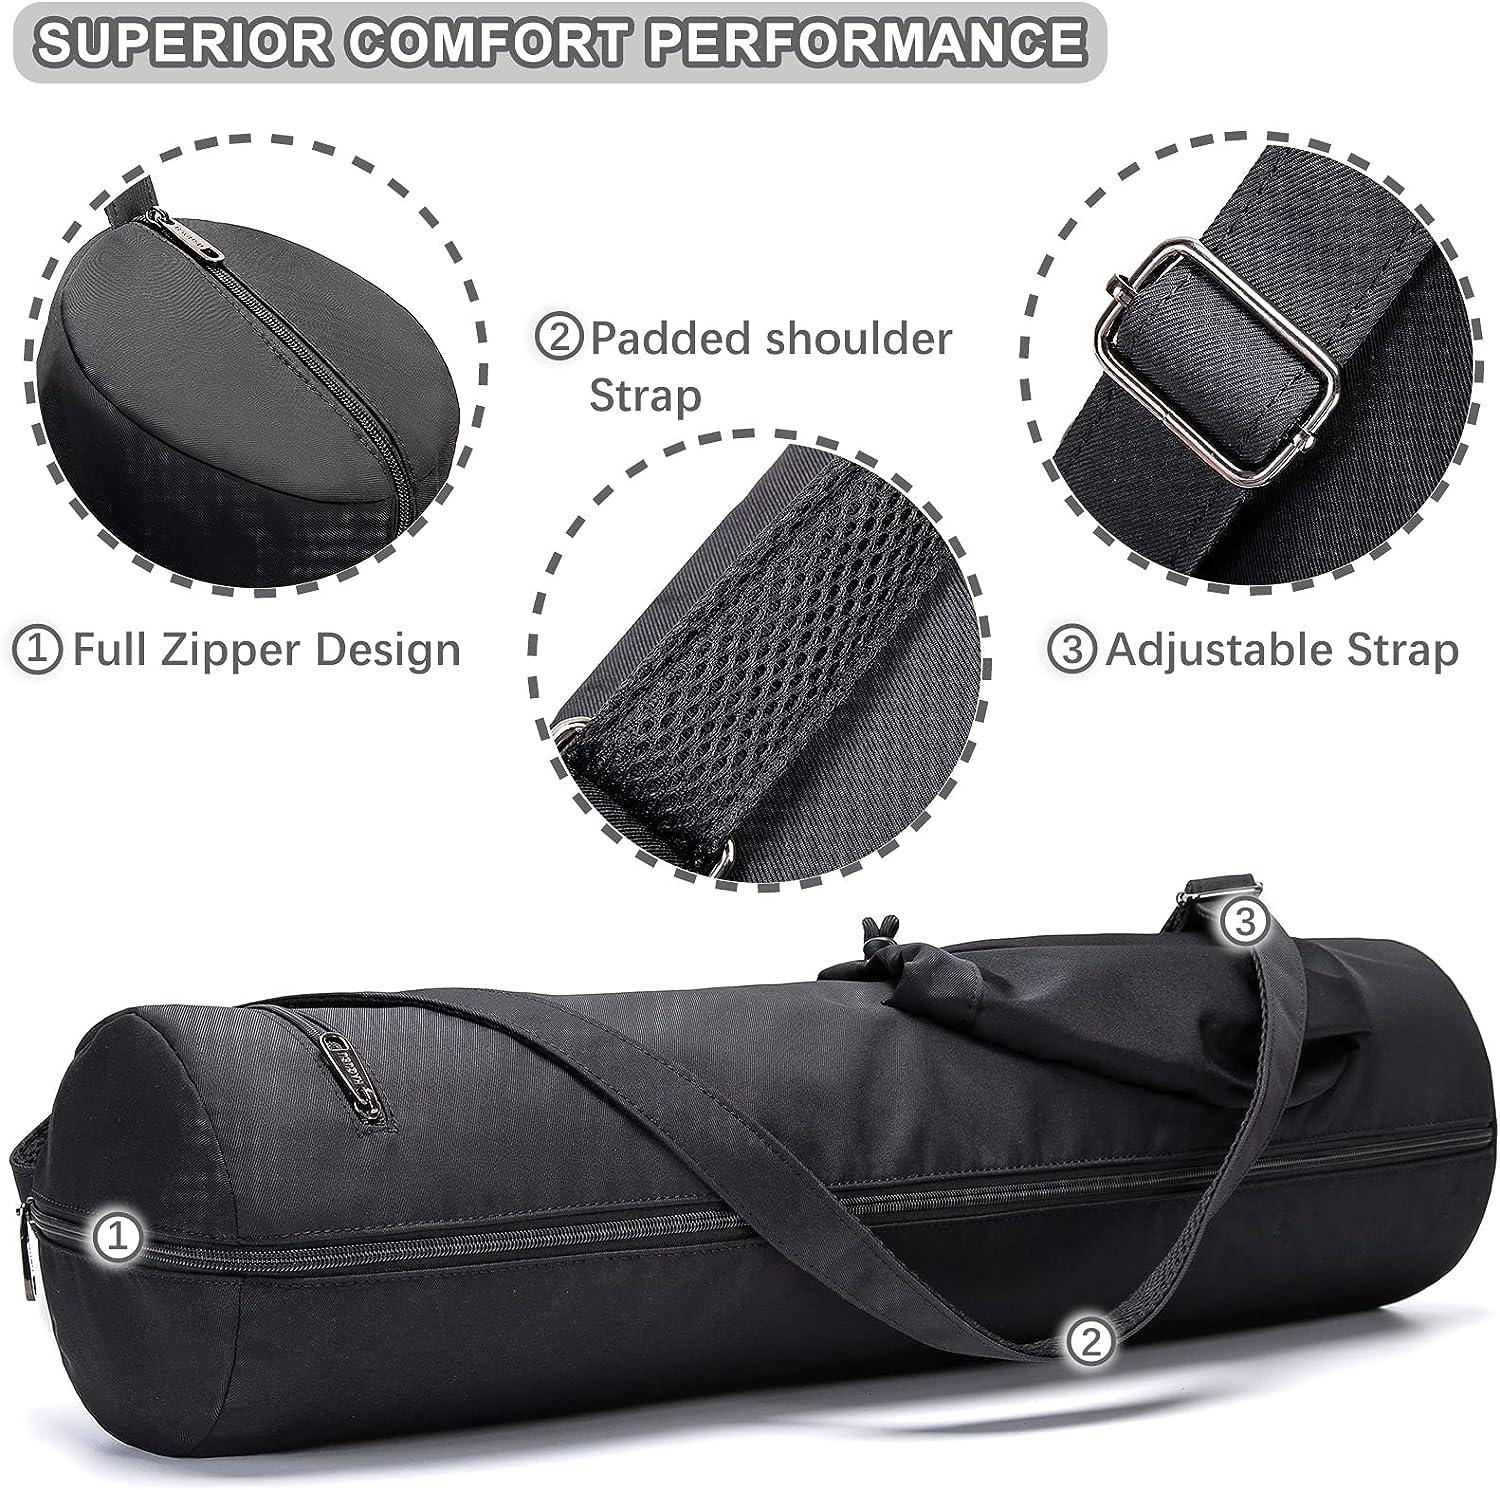 Yushufu Yoga Mat Bags and Carriers Fits All Your One size, style-33 -  General Maintenance & Diagnostics Ltd